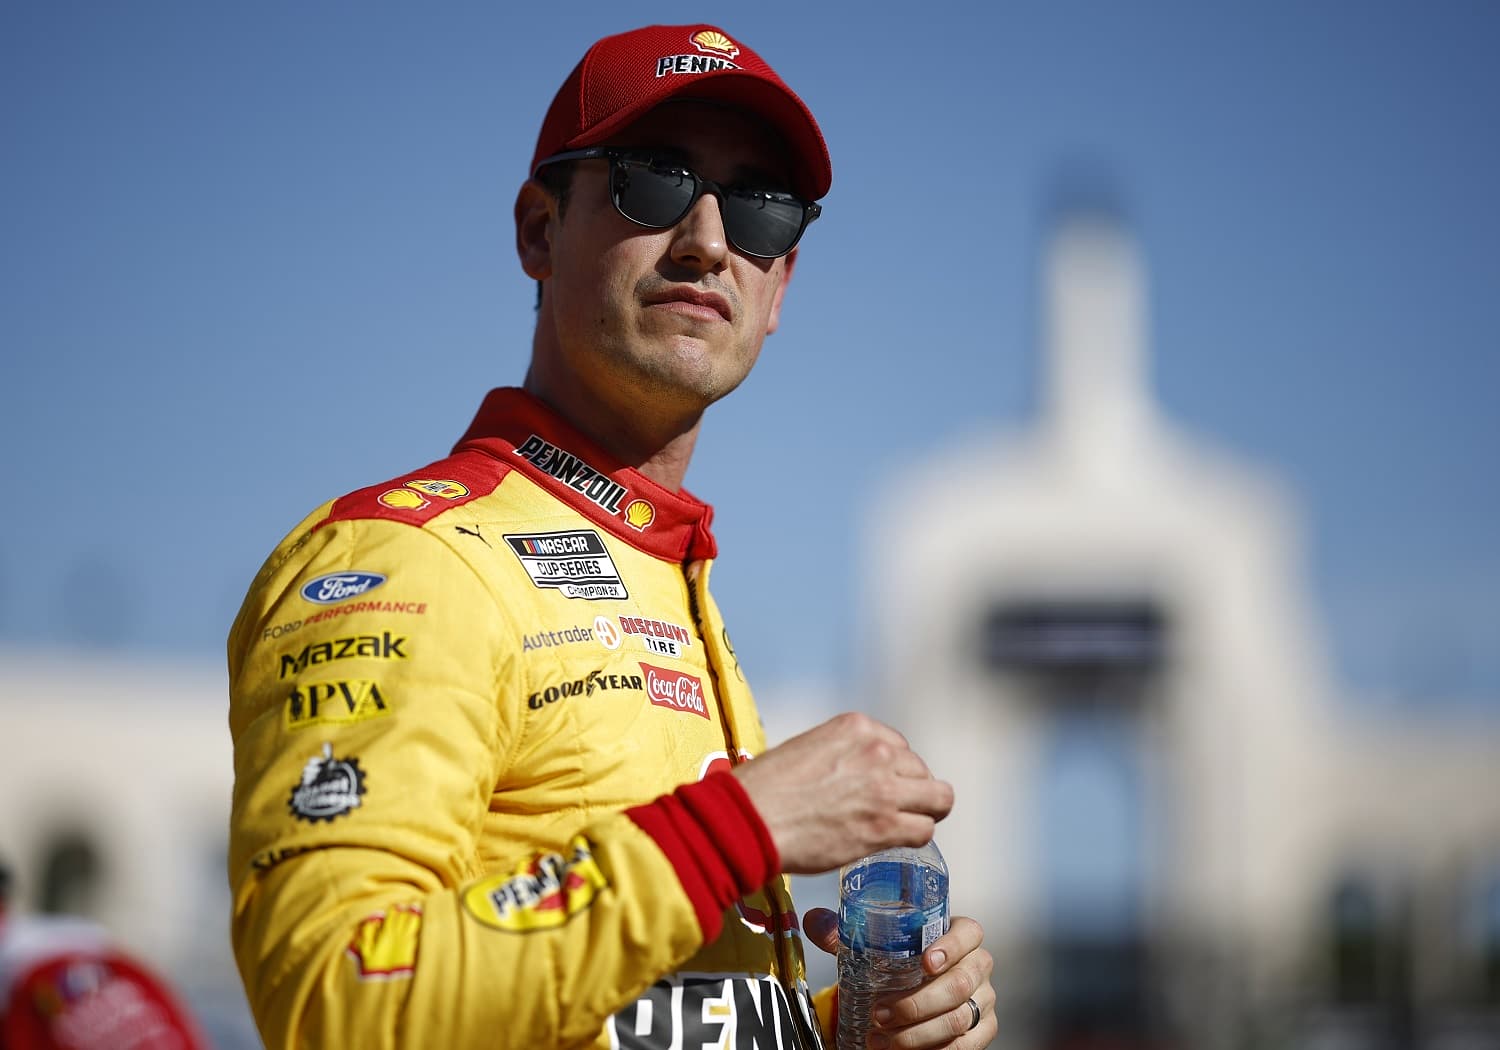 5 Key Moments for Joey Logano on His Way to 2 NASCAR Cup Series Championships